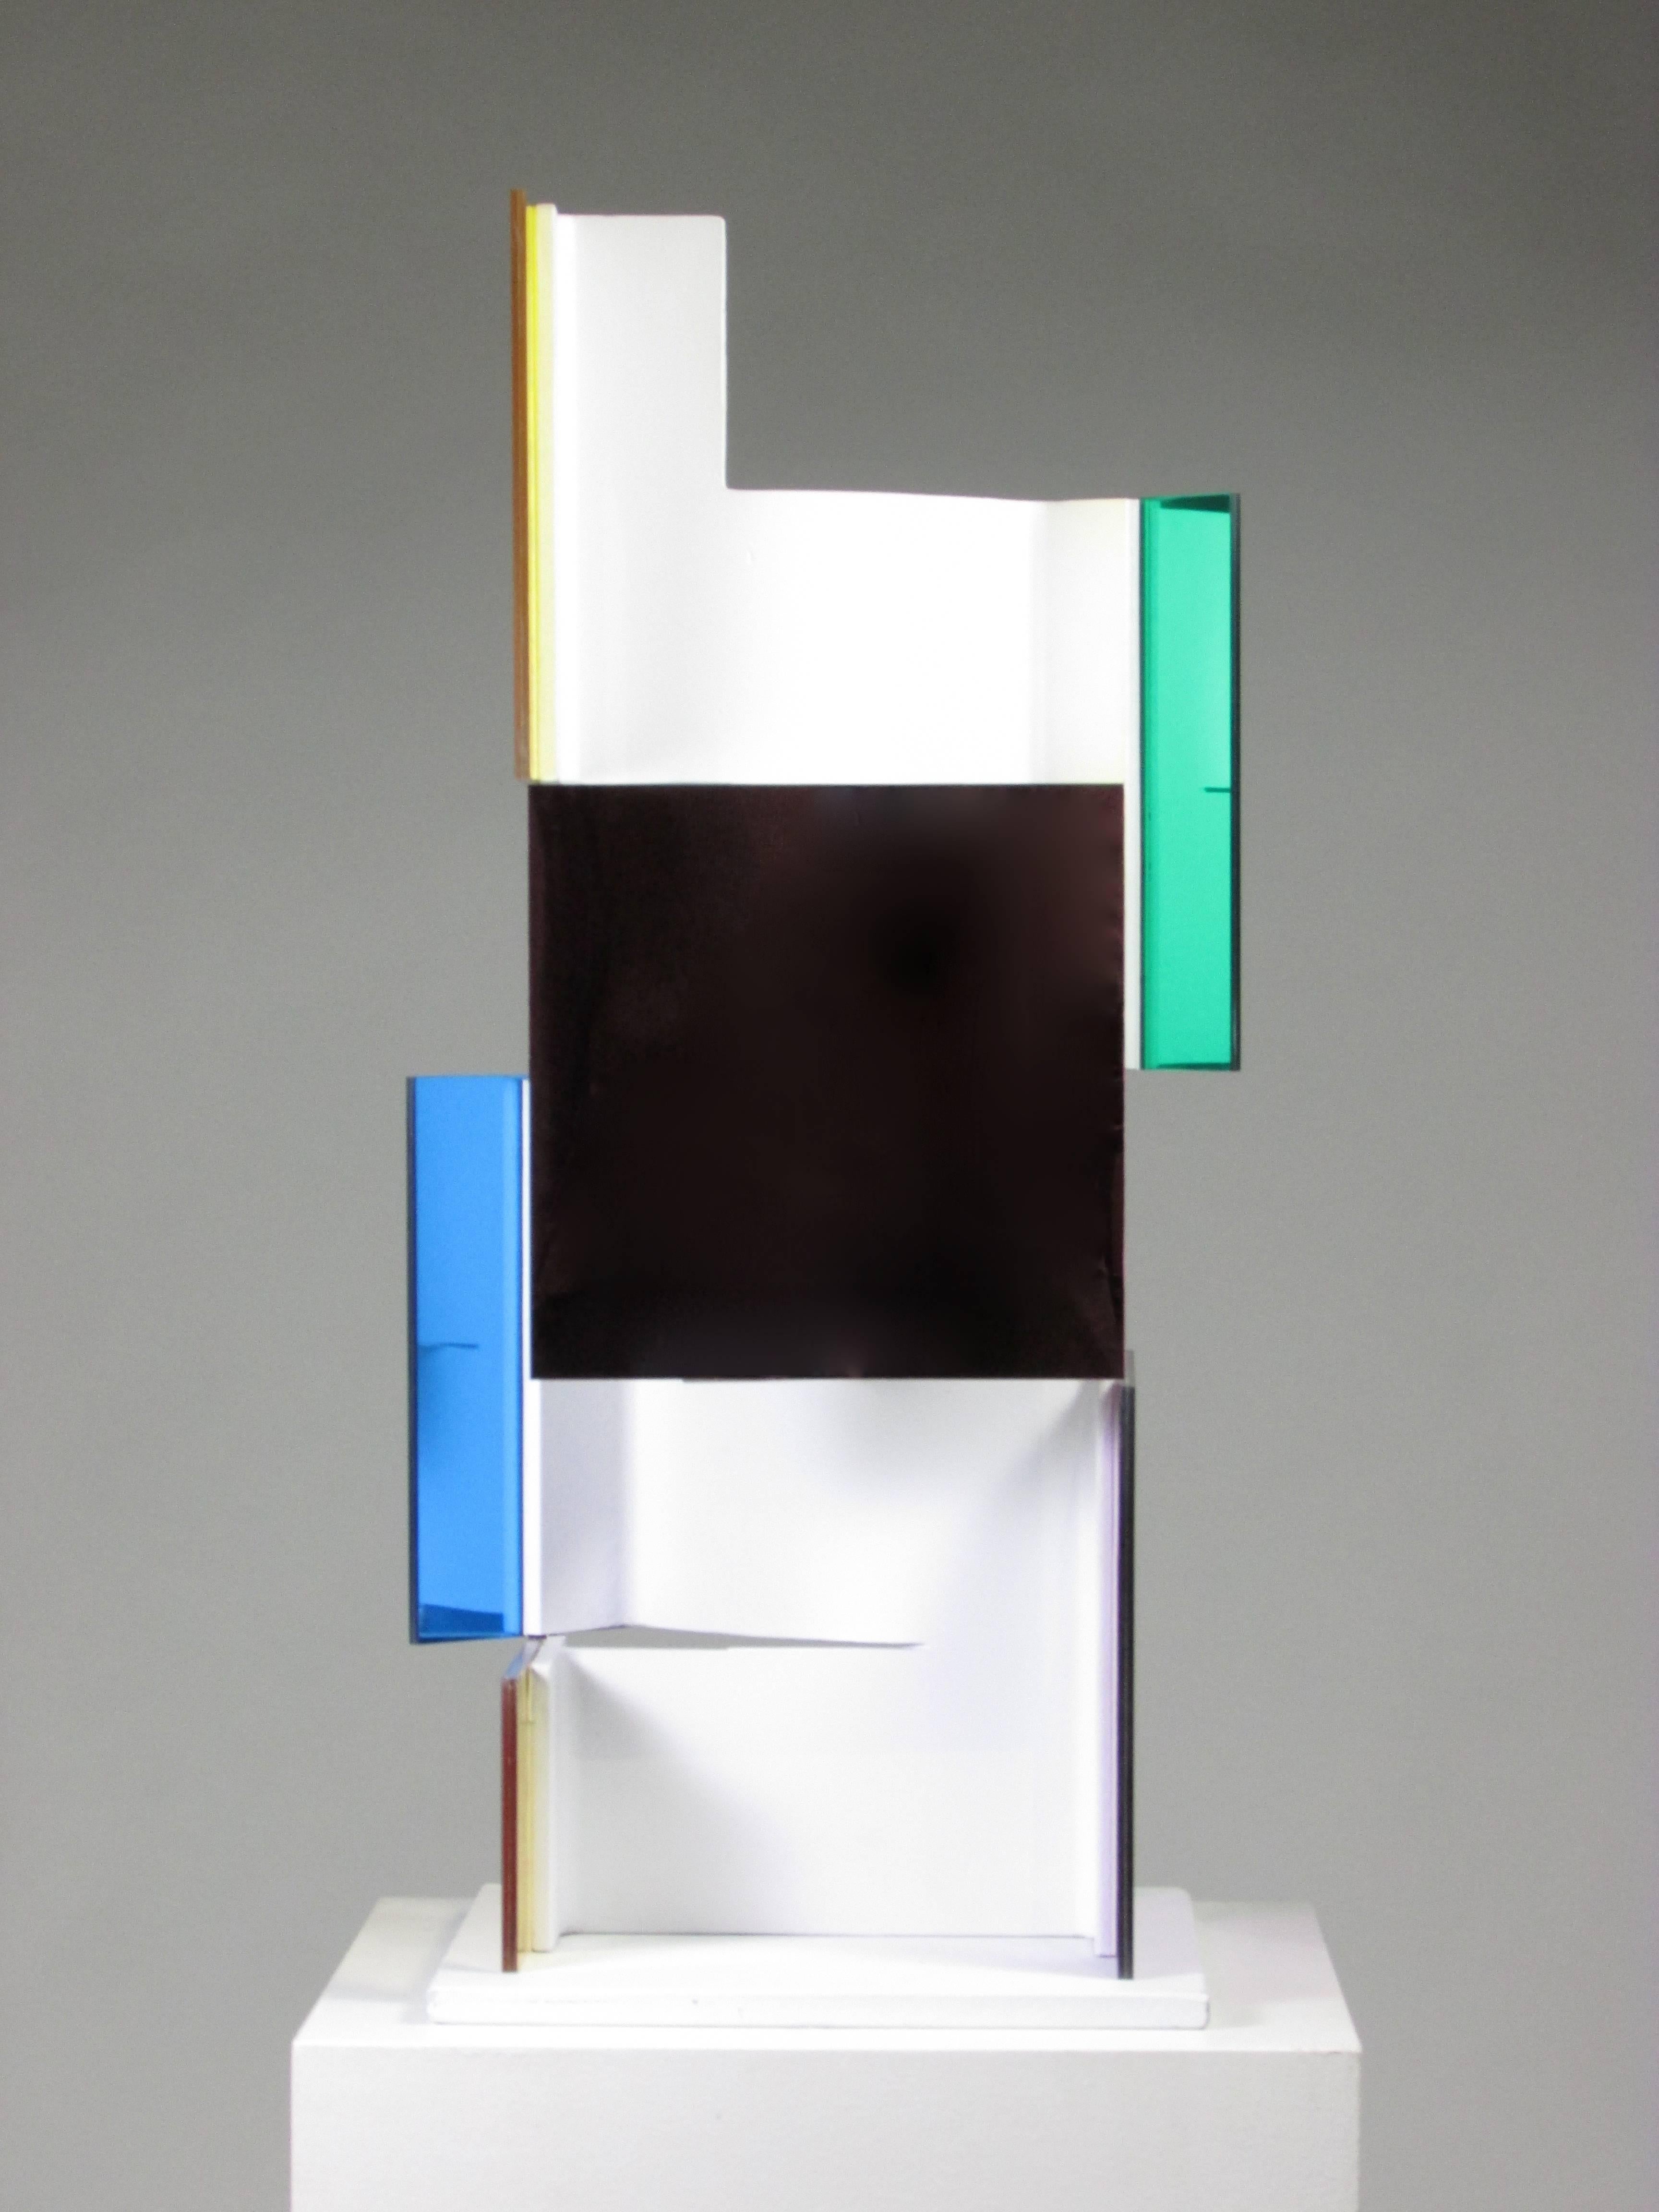 Edwin Salmon, "Five Brothers, Hold My Breath", 2016, Painted Steel I Beam and Acrylic Sheet, 25" x 12" x 12"
This sculpture will ship disassembled and will require assembly.

"Hold My Breath" is from Edwin